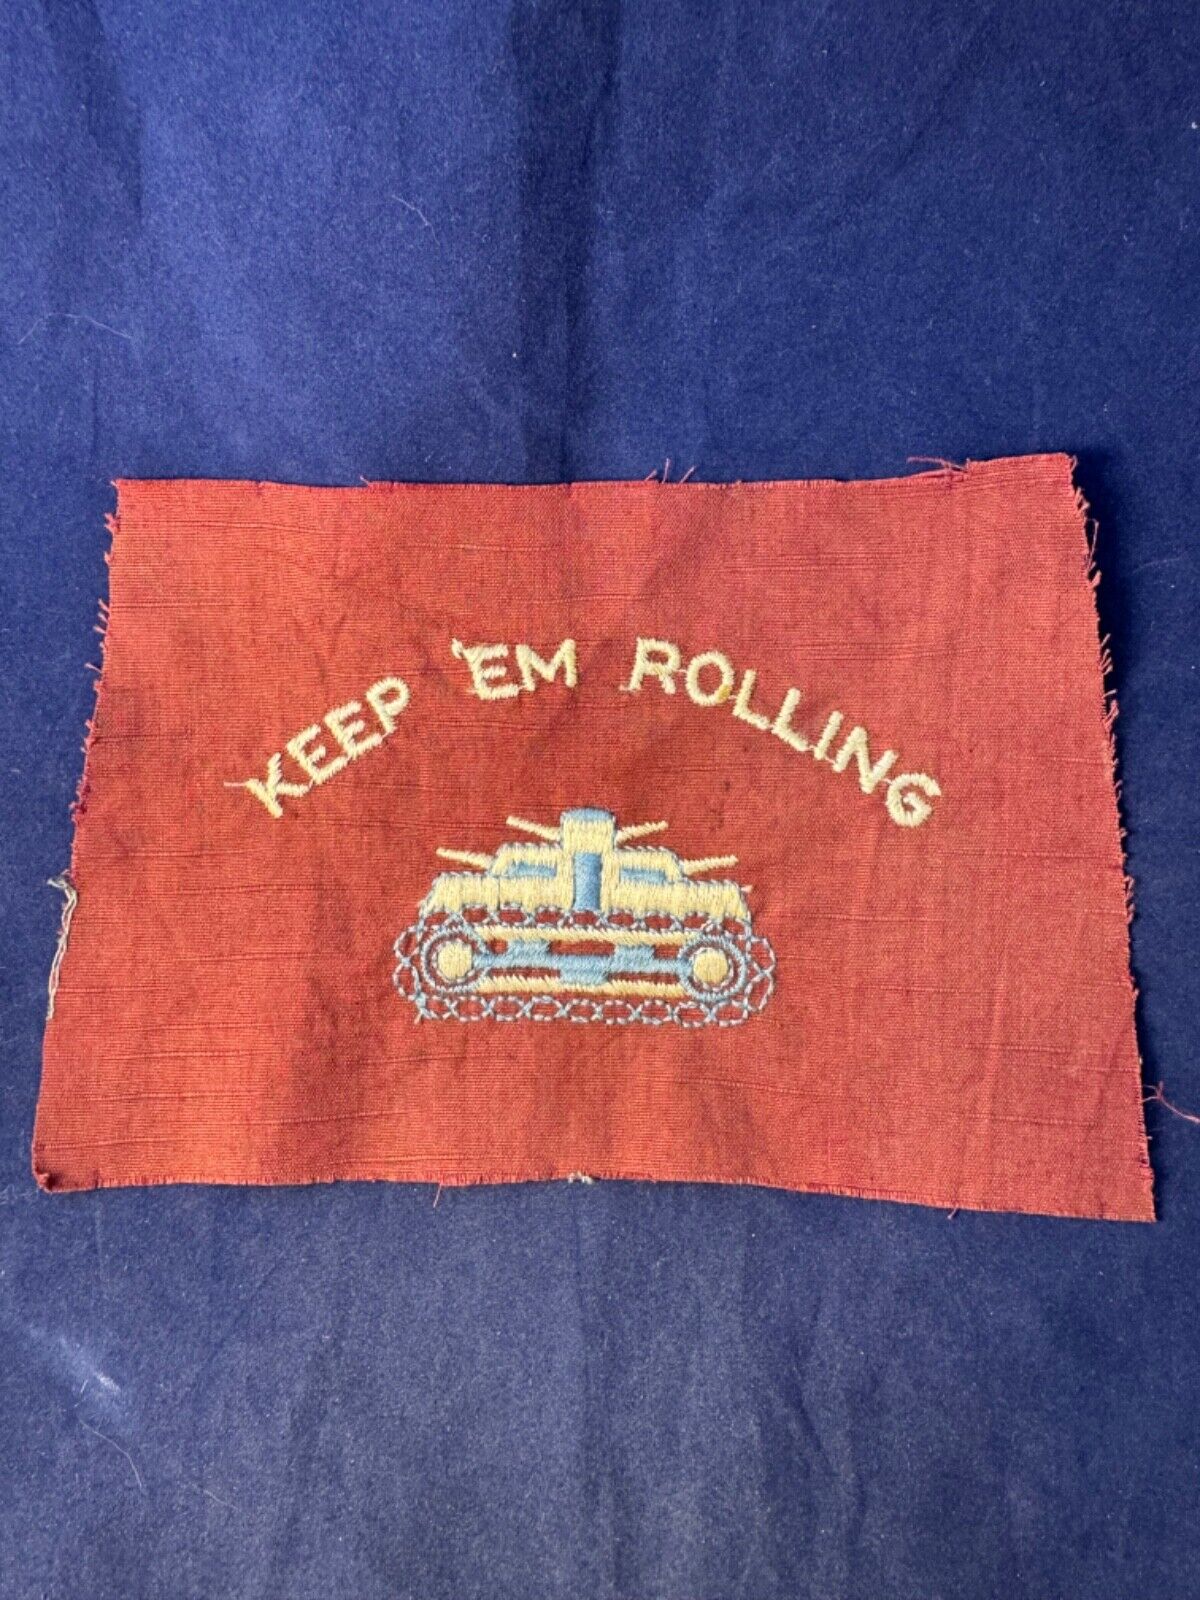 Original WWII Canadian Homefront Tank Embroidery KEEP \'EM ROLLING